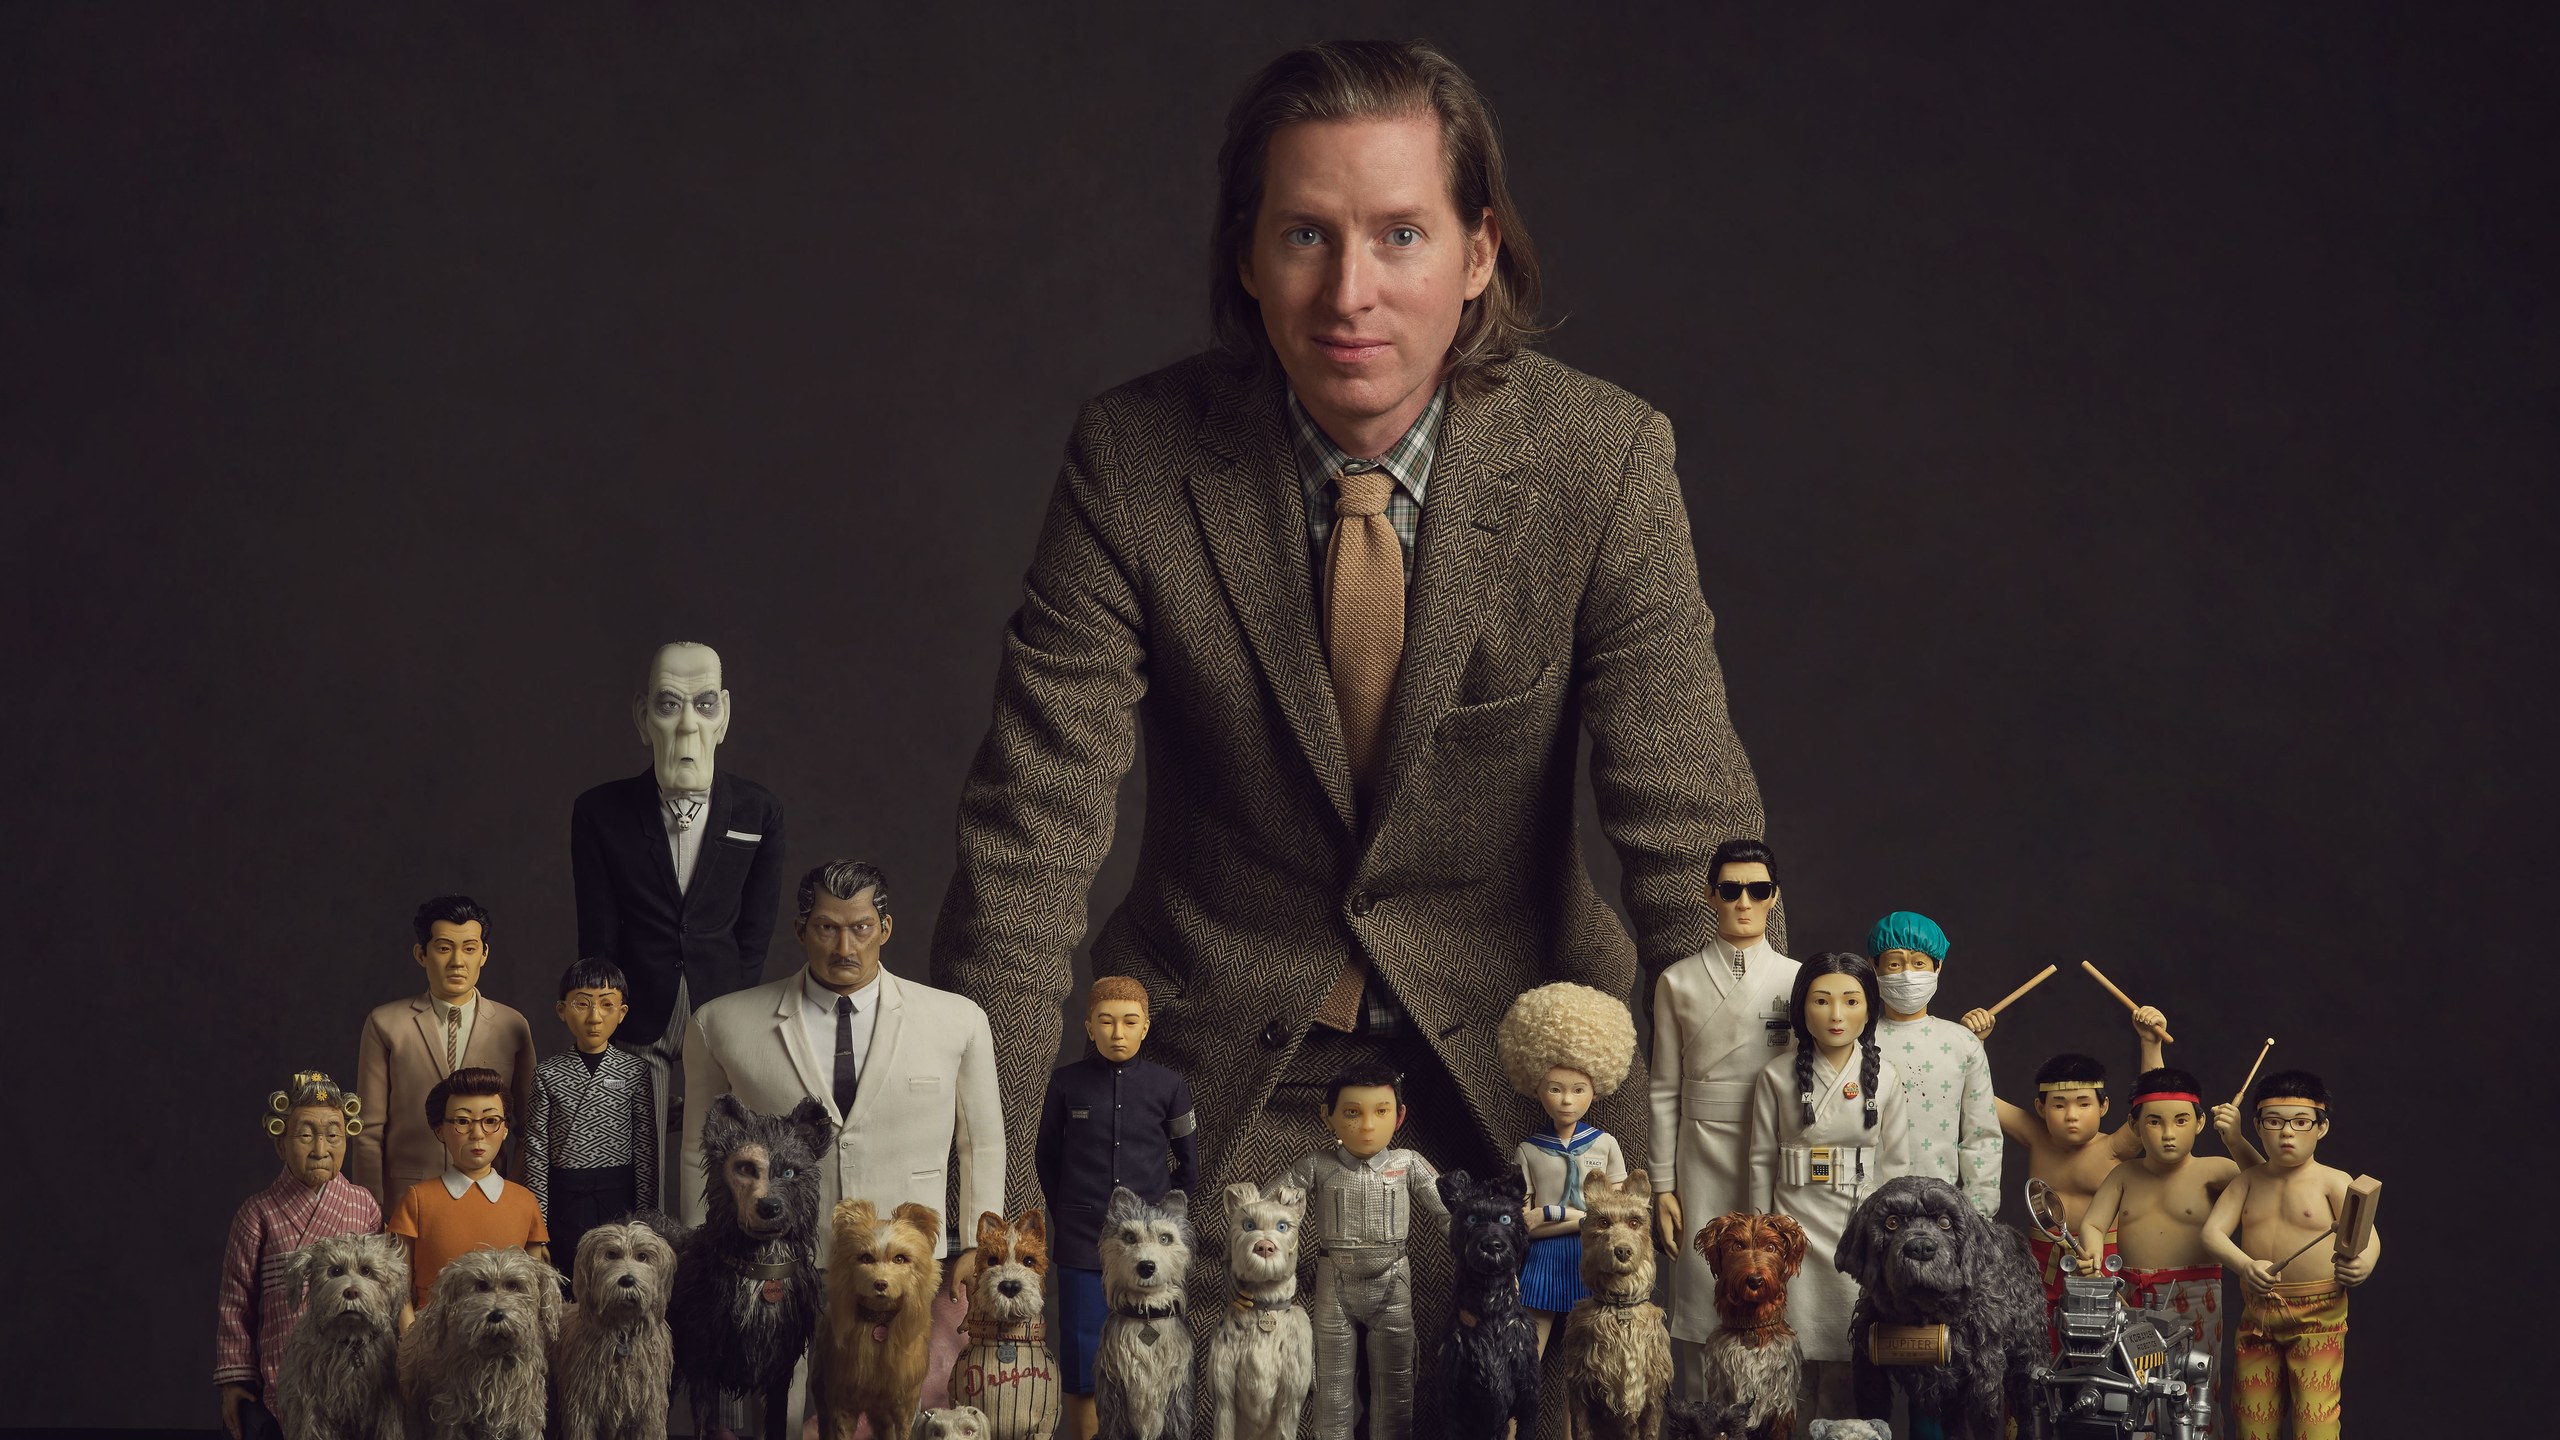 Wes Anderson’s “Isle Of Dogs” (2018) – THE DIRECTORS SERIES